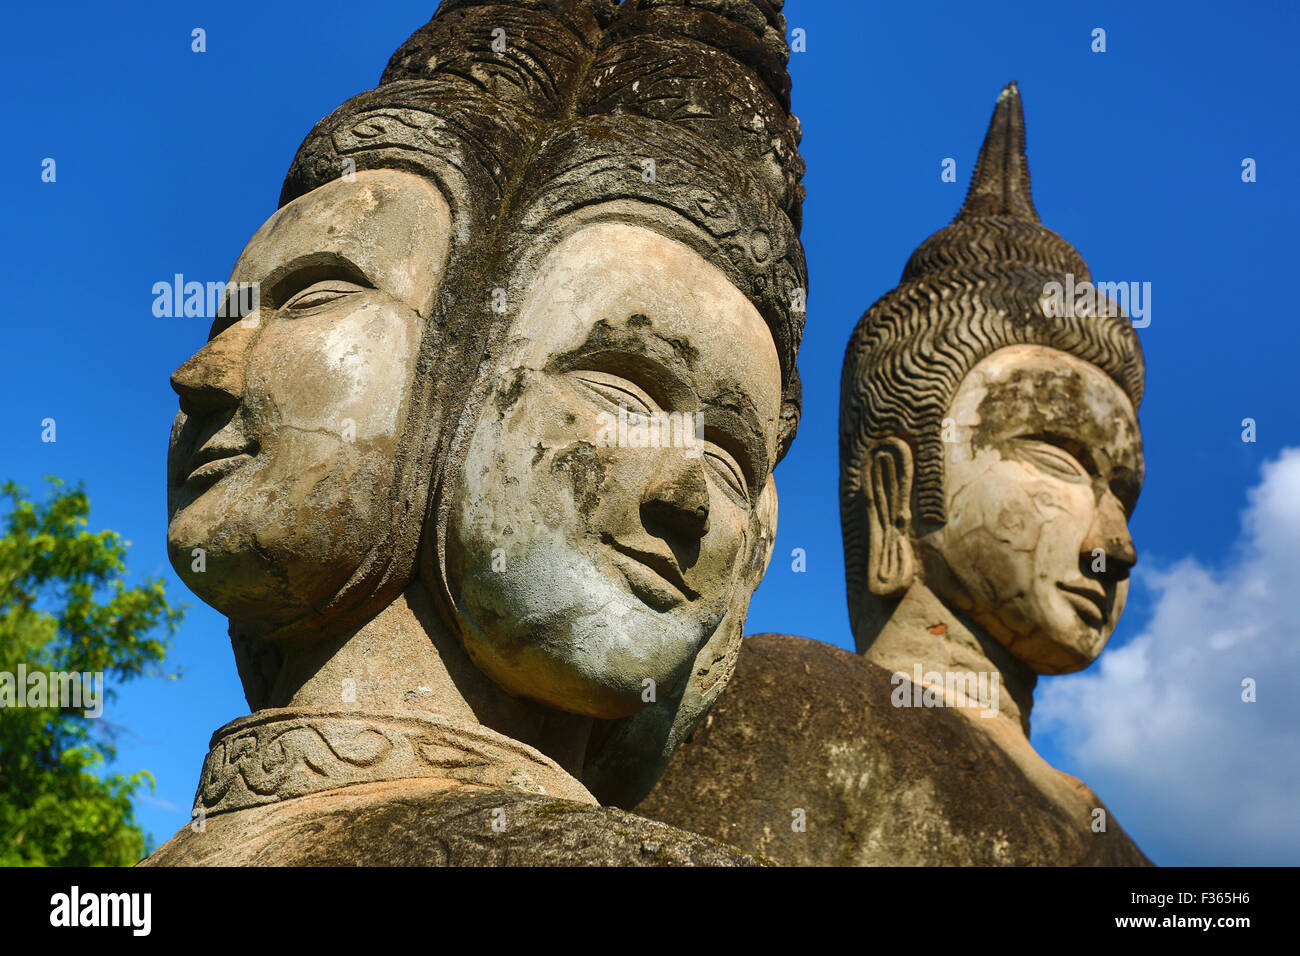 Statues of Buddha heads and faces at the Buddha Park, Vientiane, Laos Stock Photo